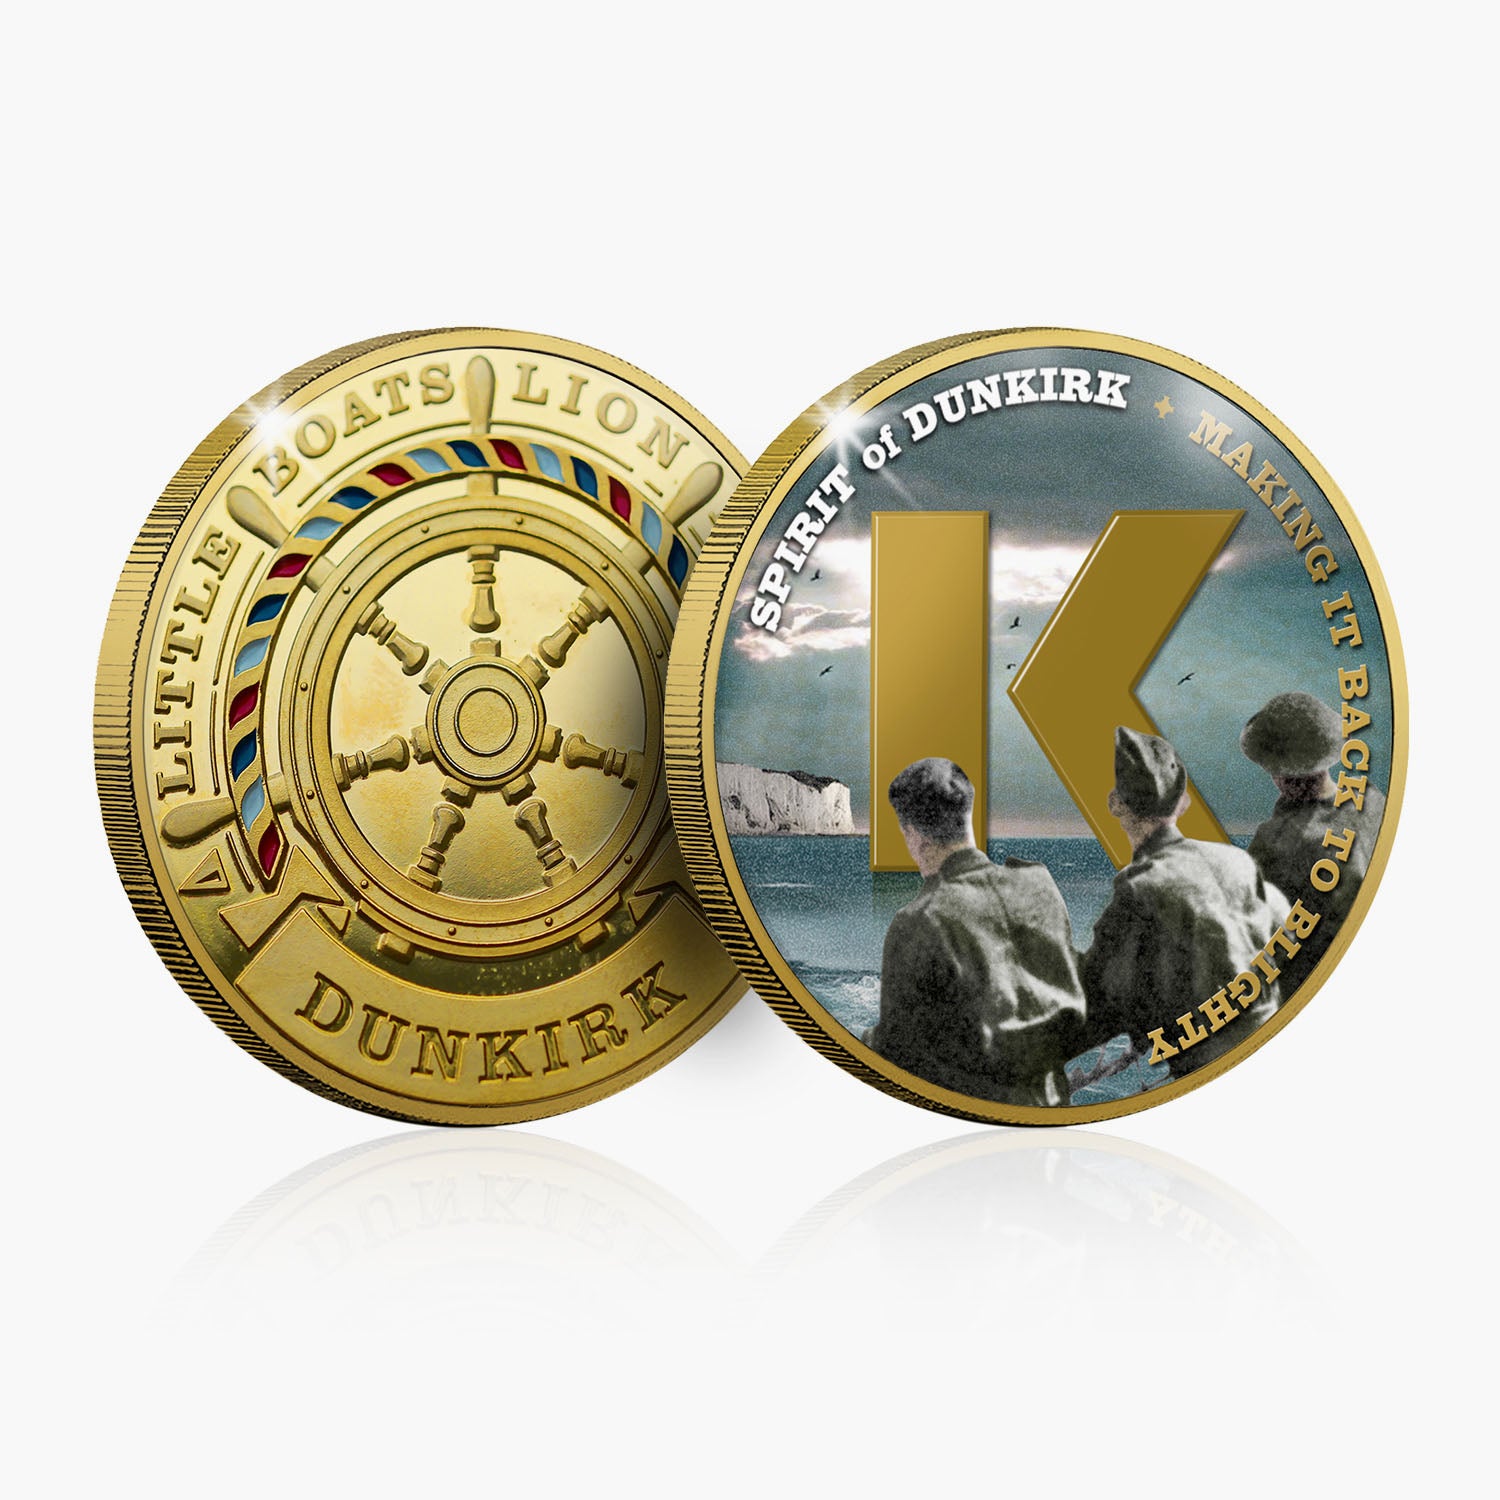 Dunkirk Complete Collection - Gold